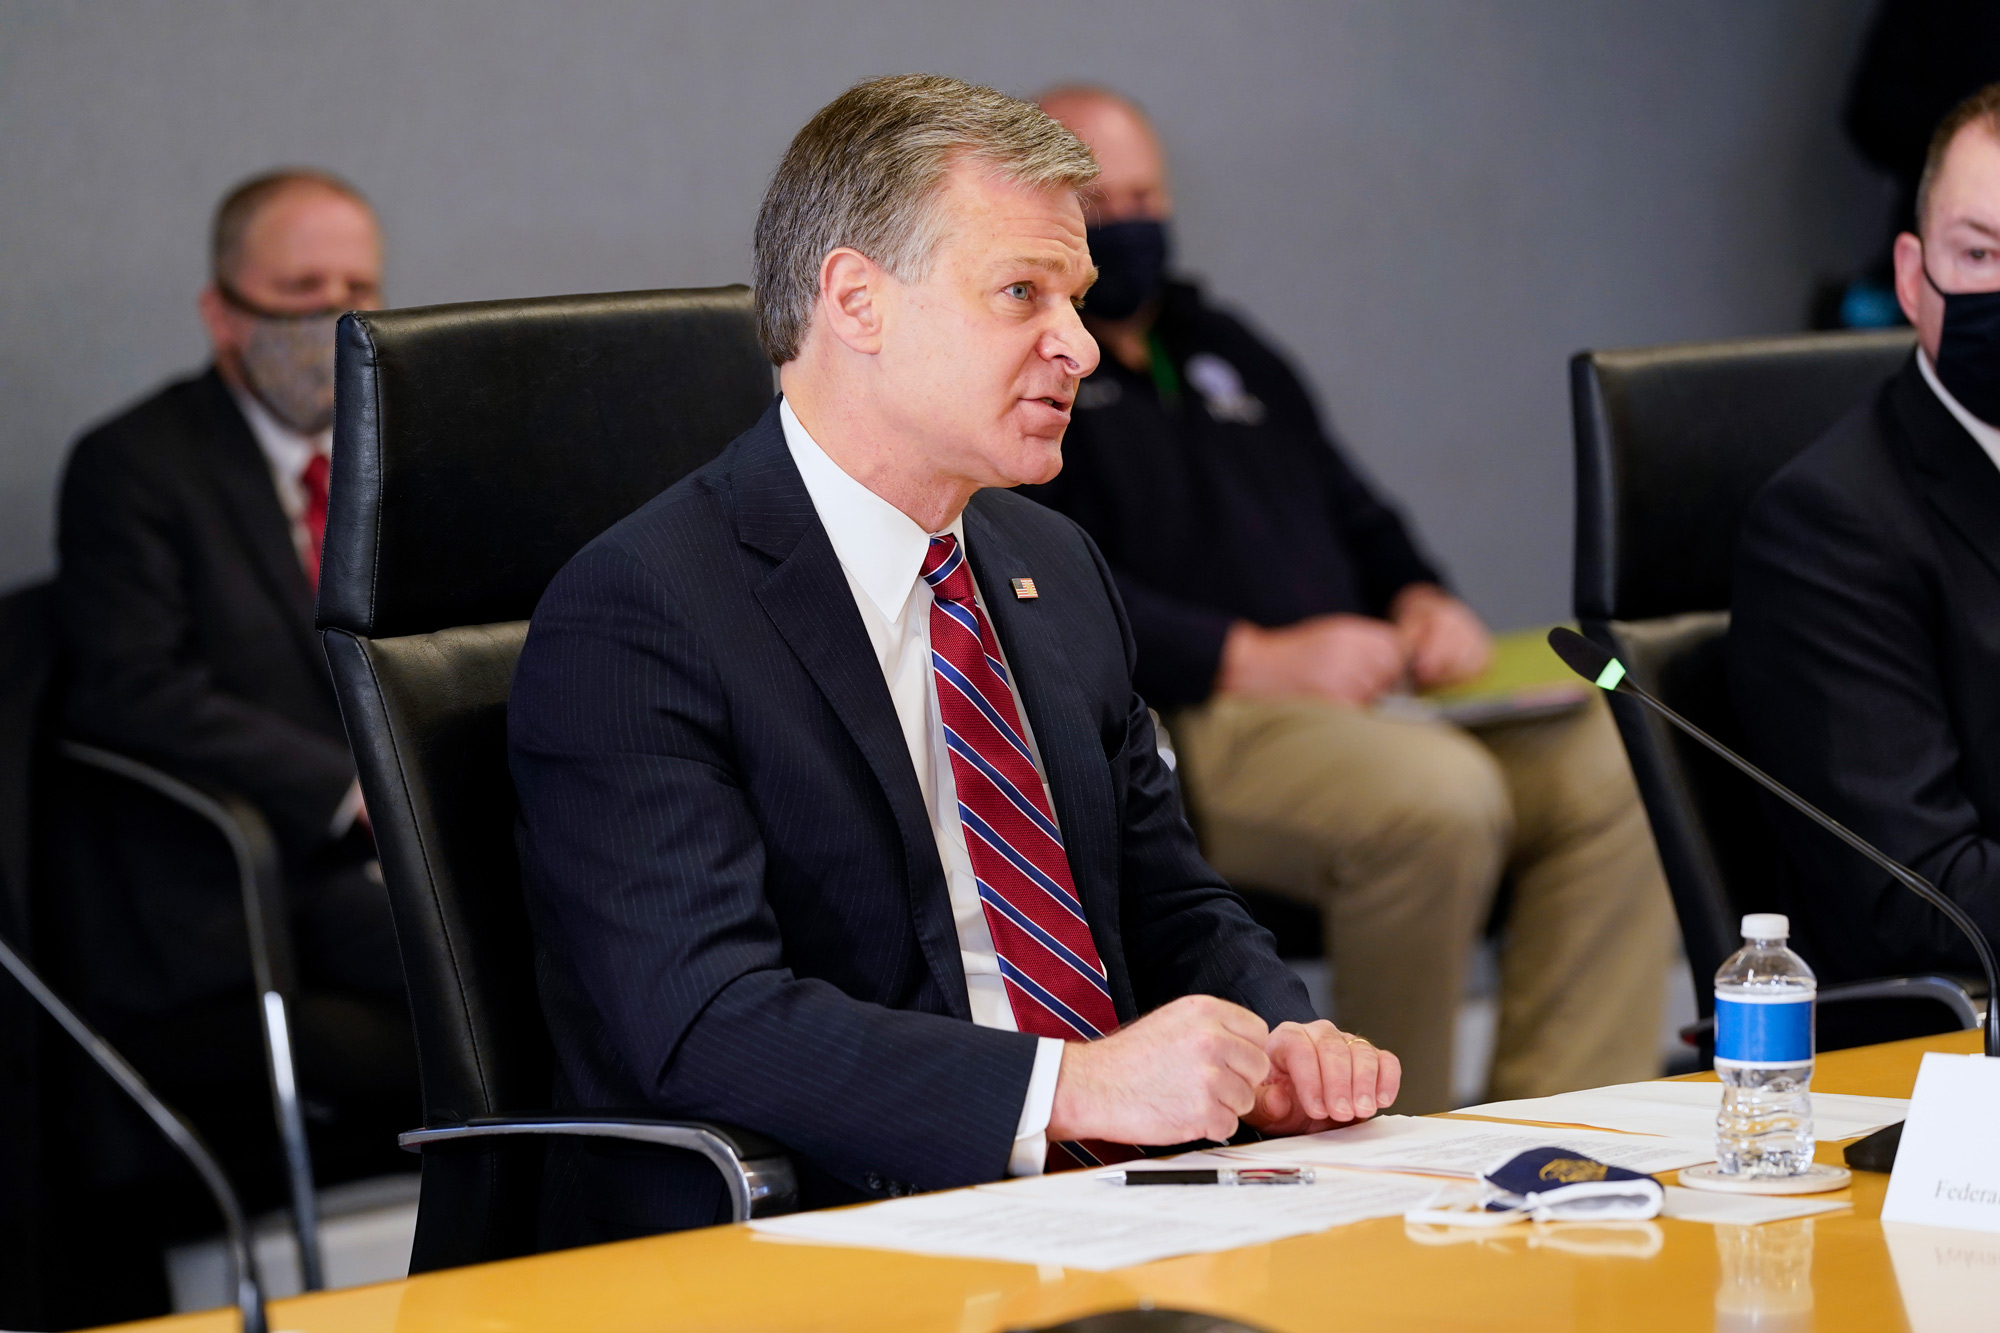 FBI Director Christopher Wray speaks during a briefing about the upcoming presidential inauguration at FEMA headquarters on January 14 in Washington, DC.